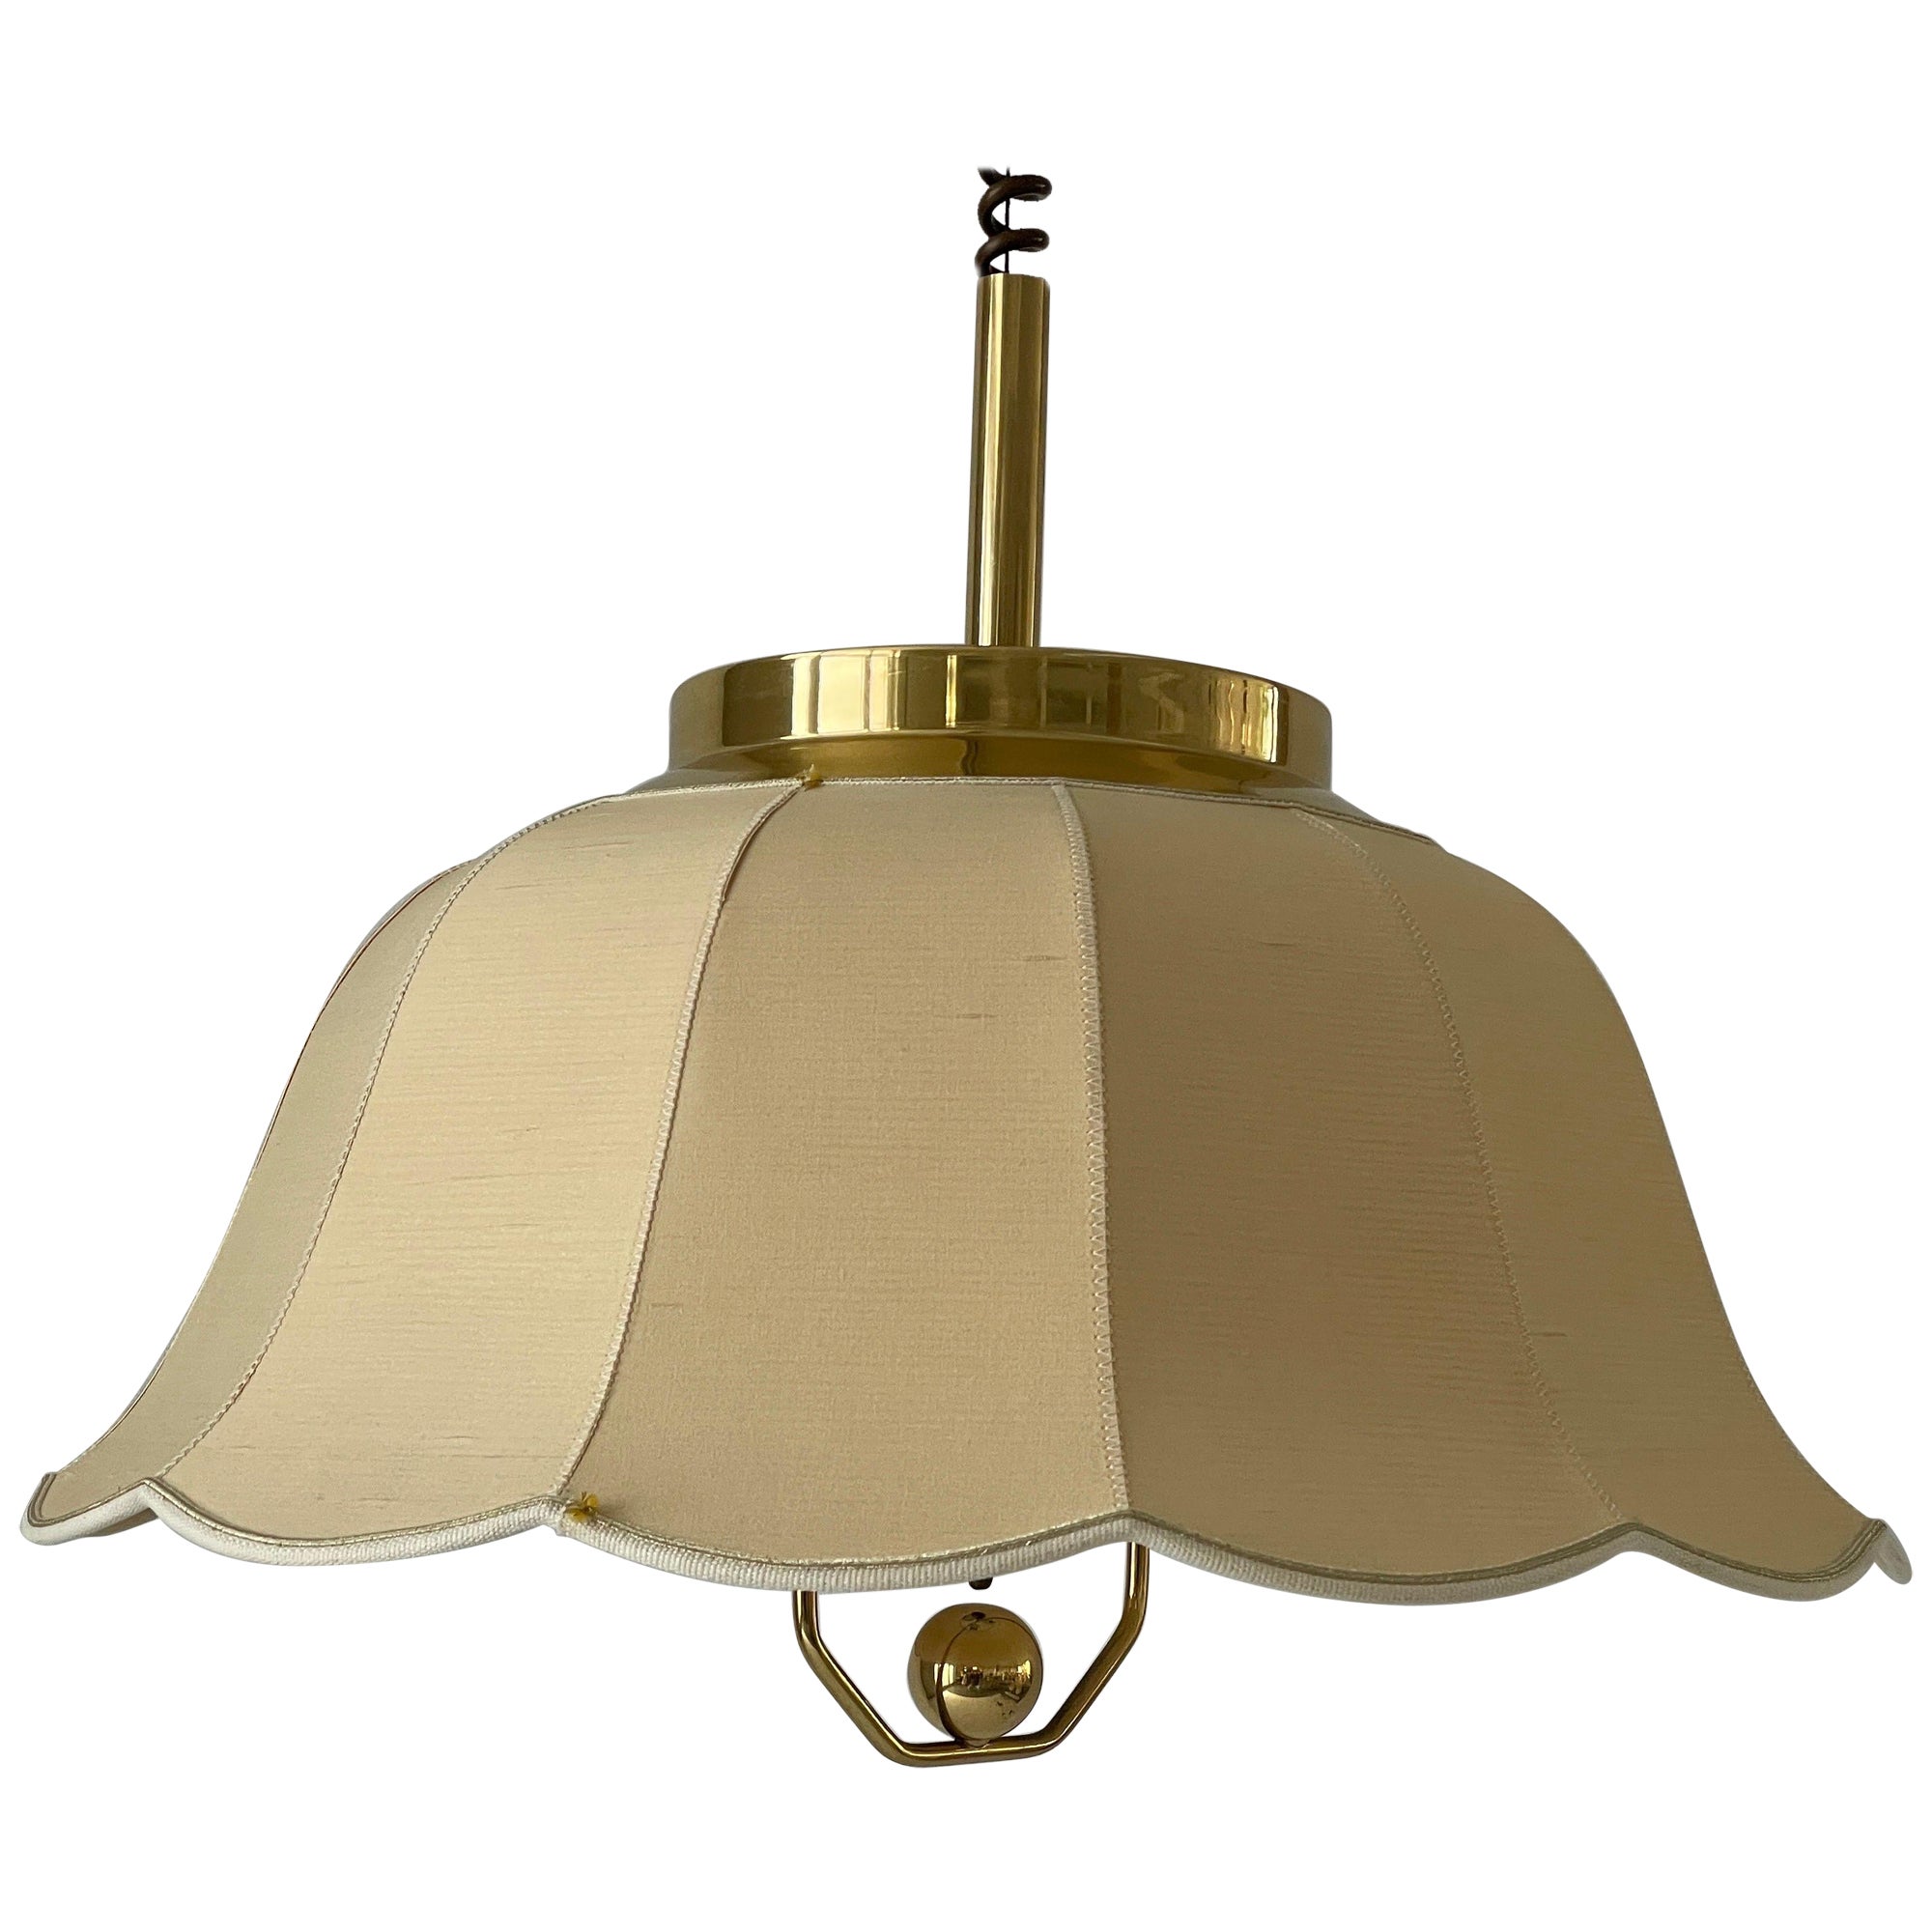 Fabric and Brass 5 socket Adjustable Shade Pendant Lamp by WKR, 1970s, Germany